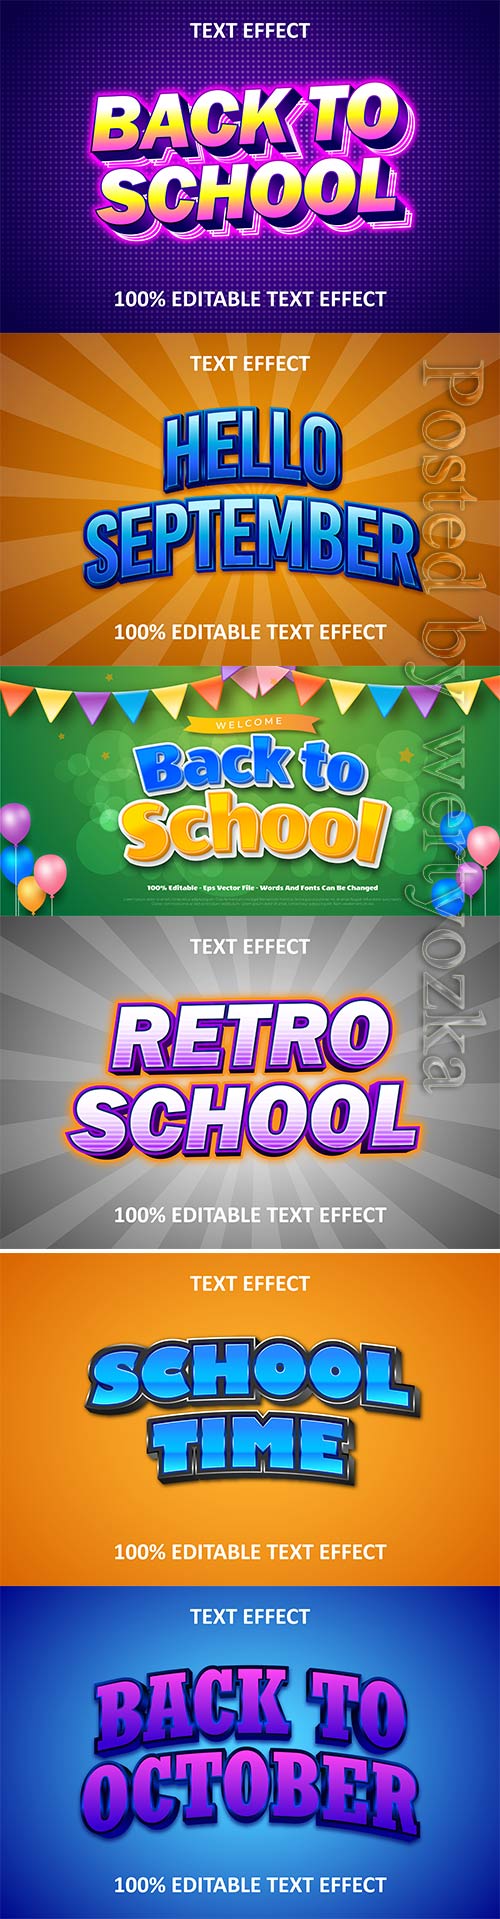 Back to school 3d editable text style effect vector